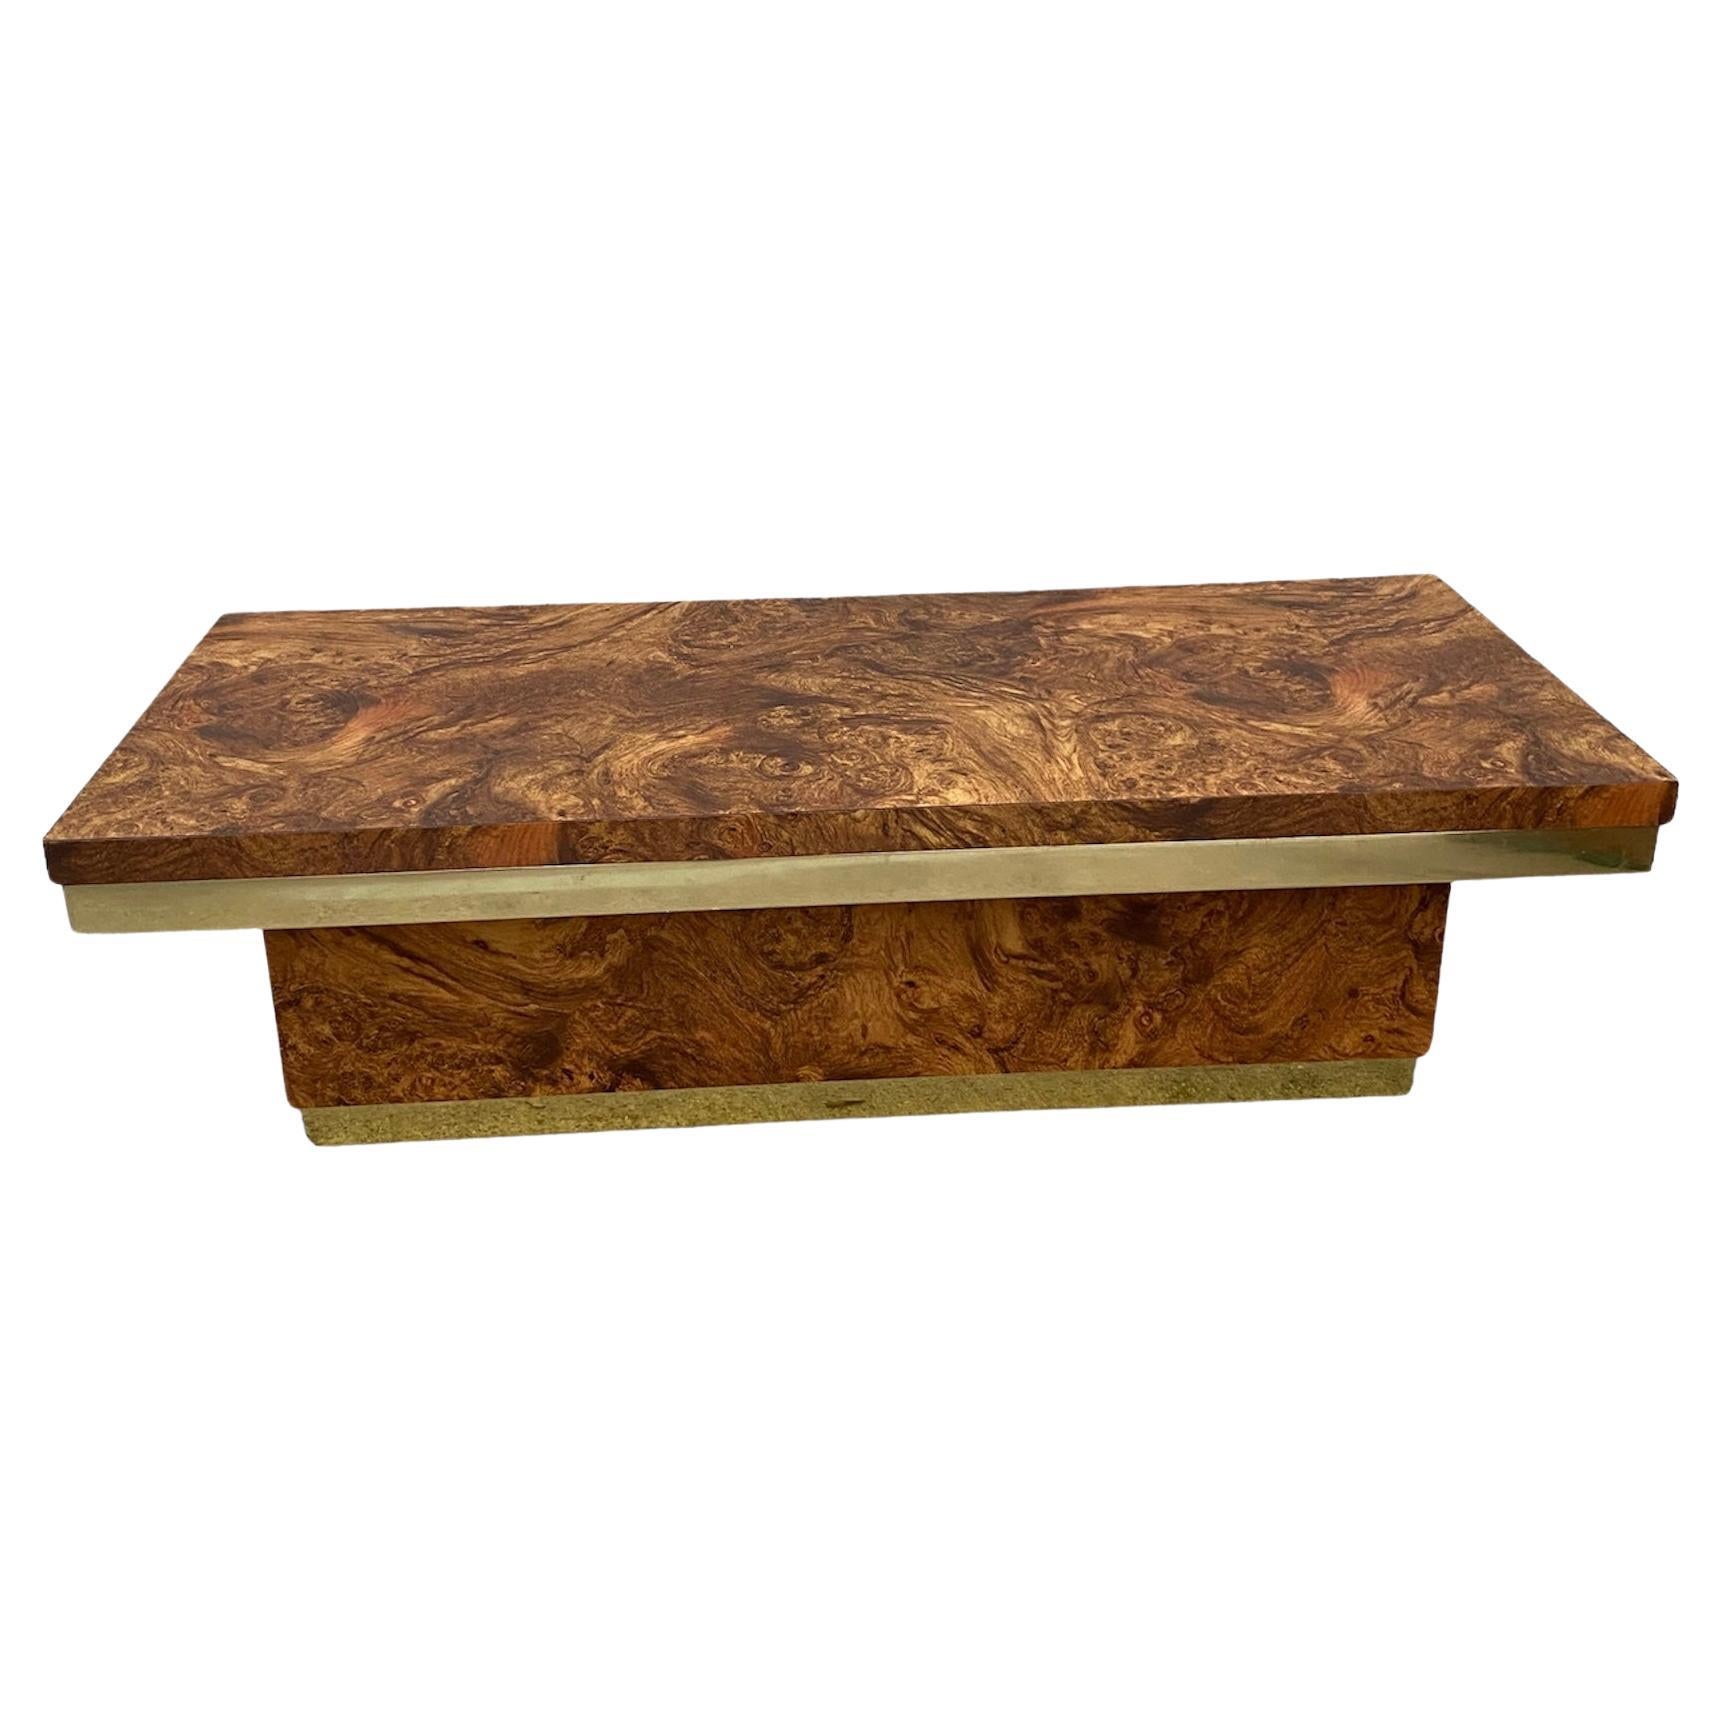 Midcentury Burl Wood and Brass Coffee Table